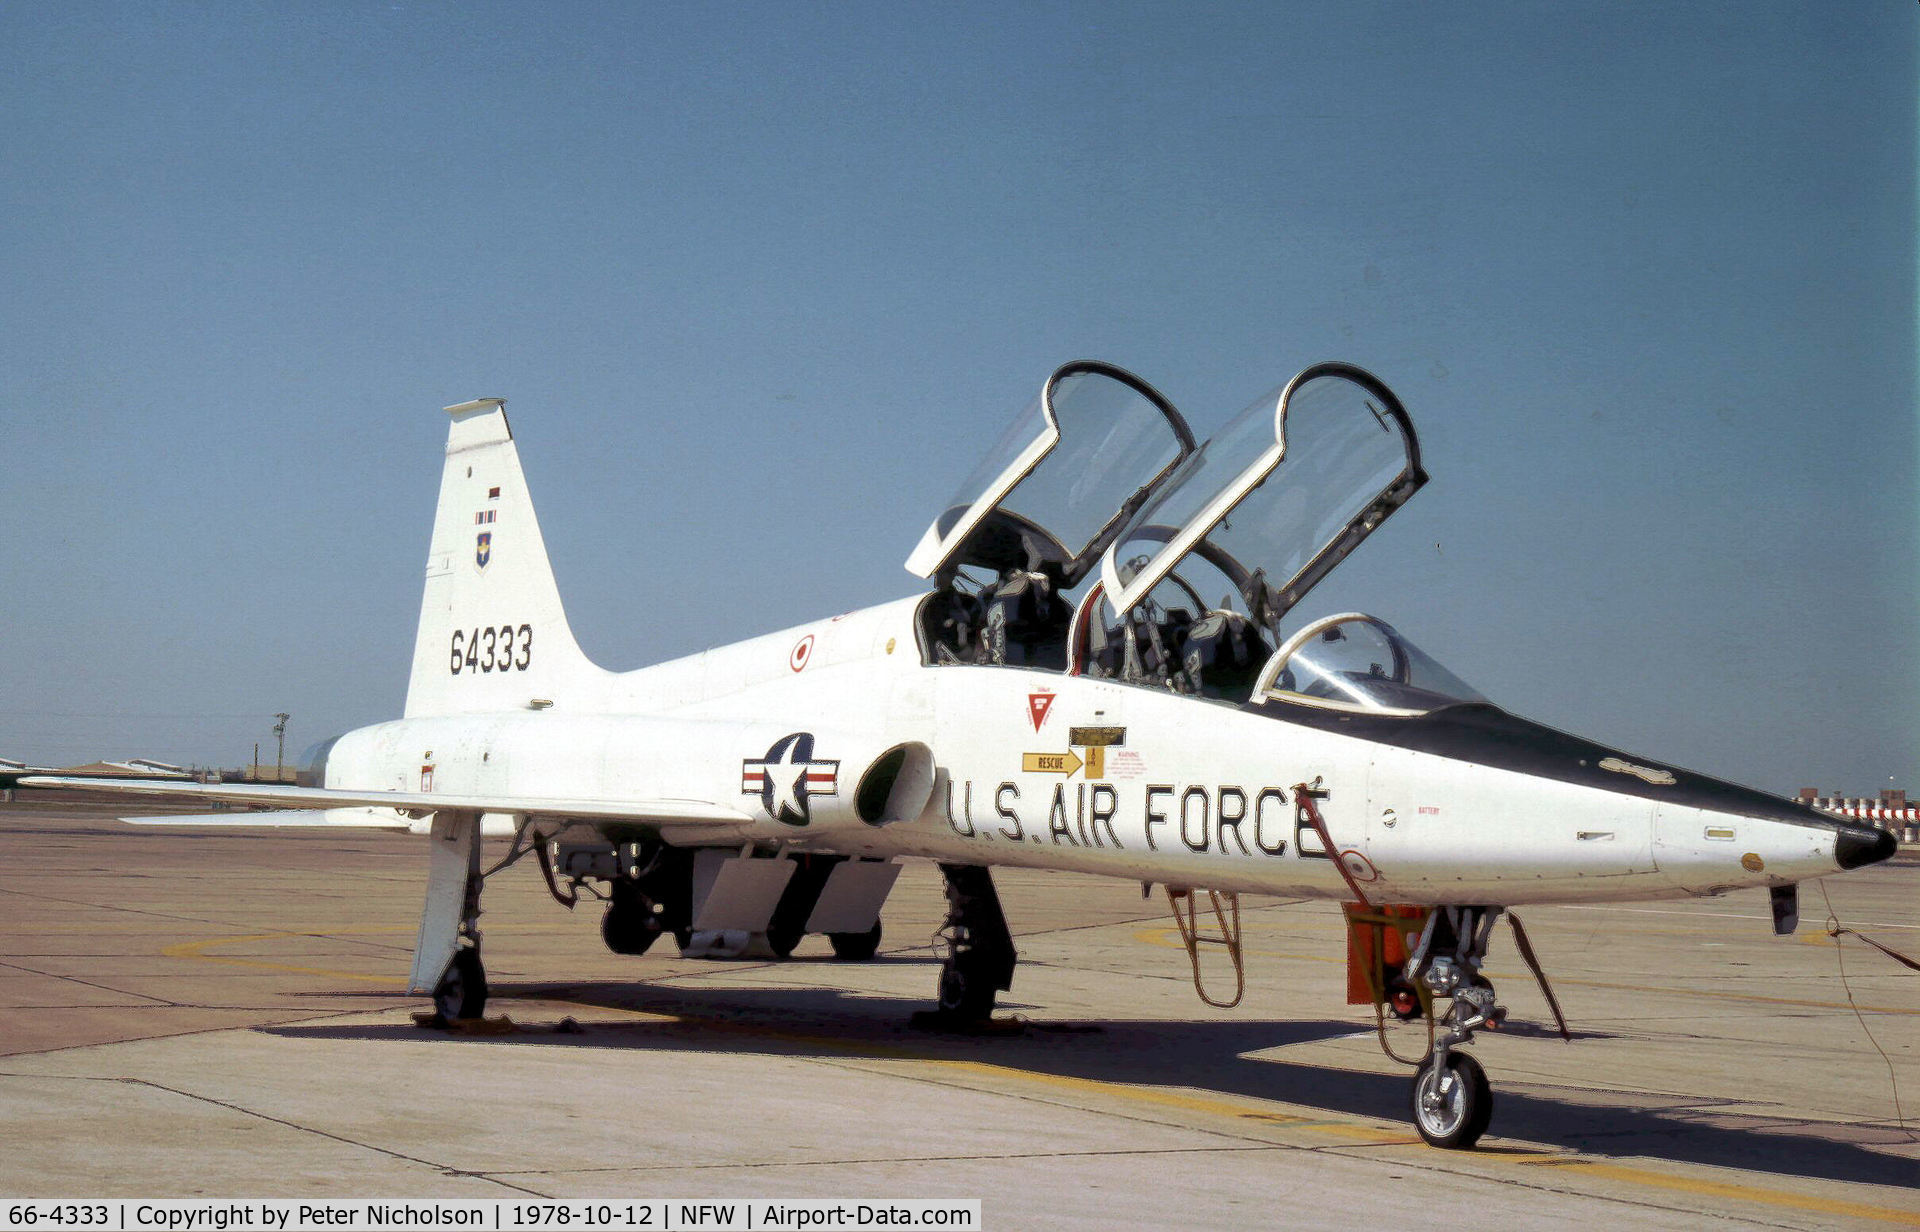 66-4333, 1966 Northrop T-38A Talon C/N N.5909, T-38A Talon of 12th Flying Training Wing at Randolph AFB on the flight-line at Carswell AFB in October 1978.